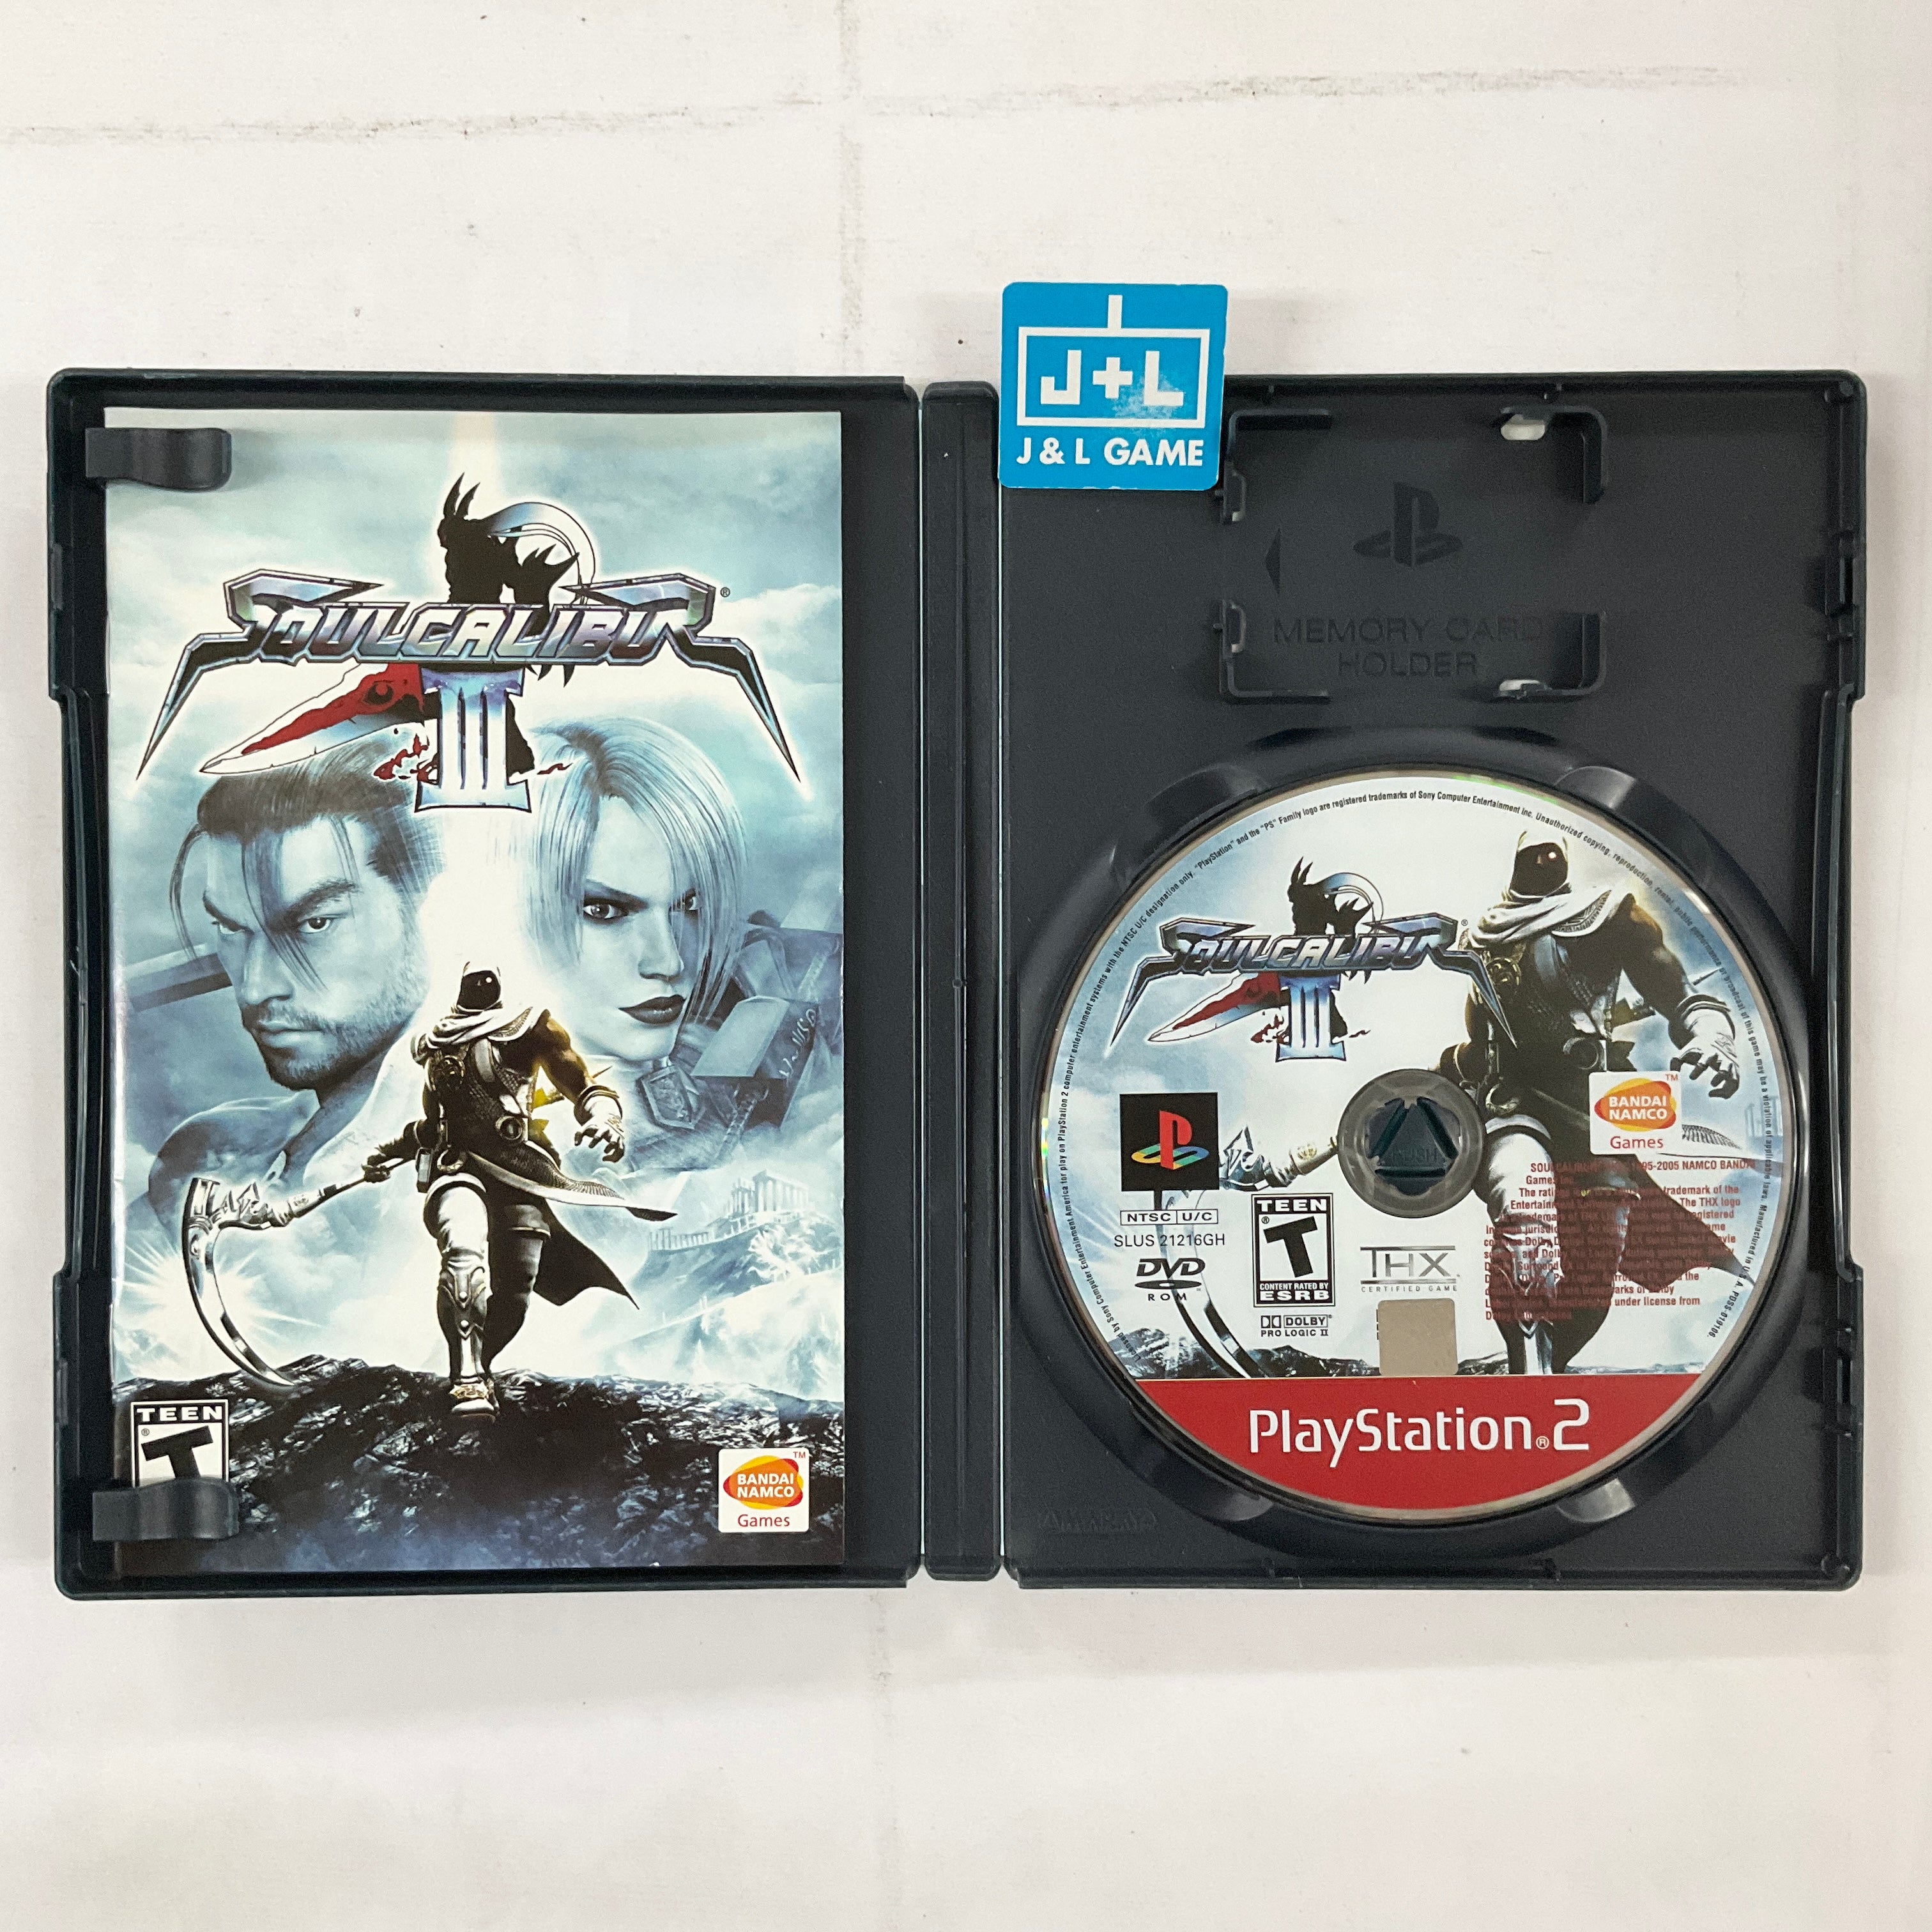 SoulCalibur III (Greatest Hits) - (PS2) PlayStation 2 [Pre-Owned] Video Games Namco   